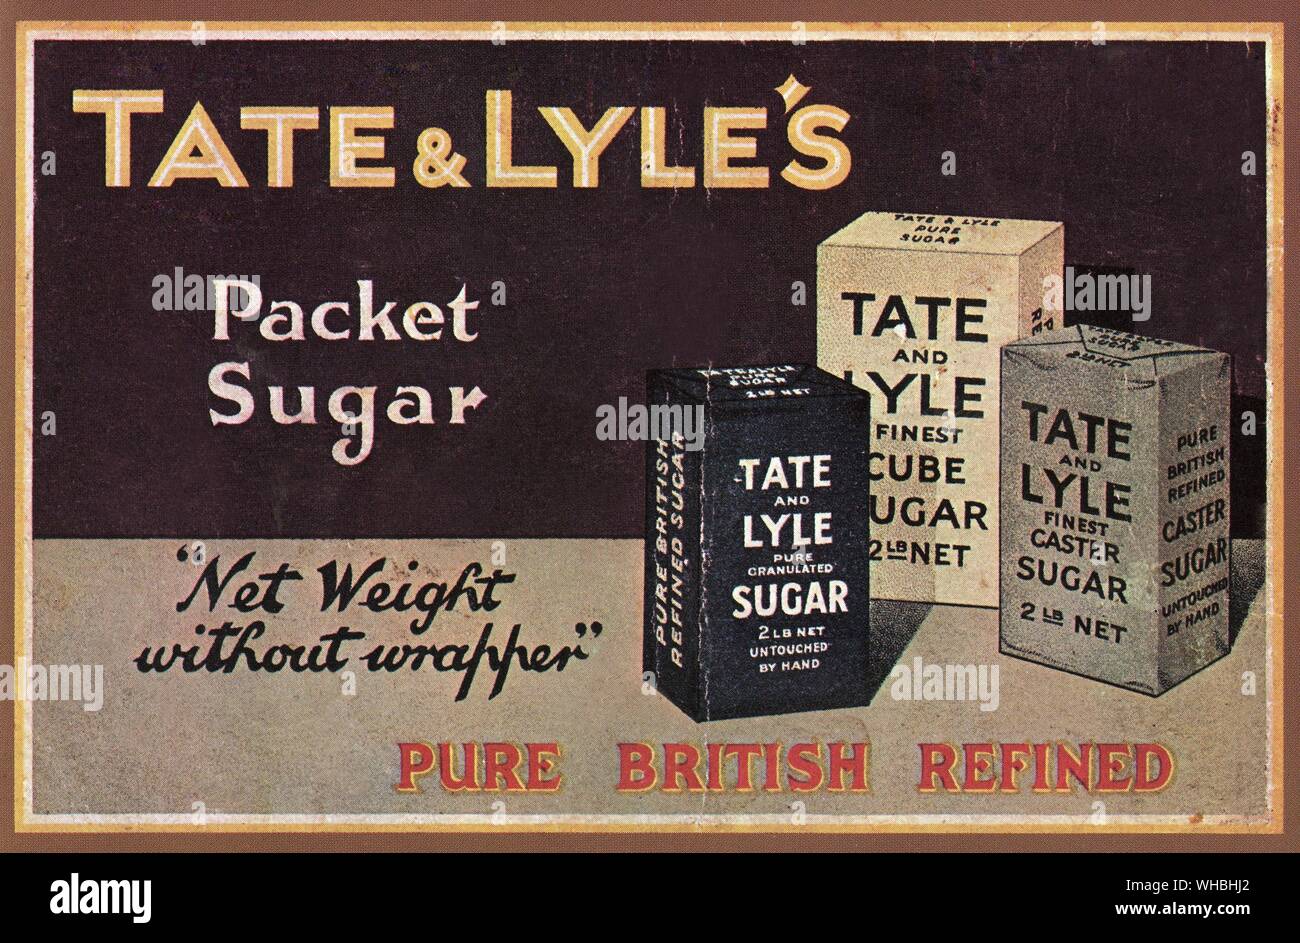 A Tate and Lyle advertisement for cube sugar in the tenth edition of their Some Everyday Dishes Stock Photo